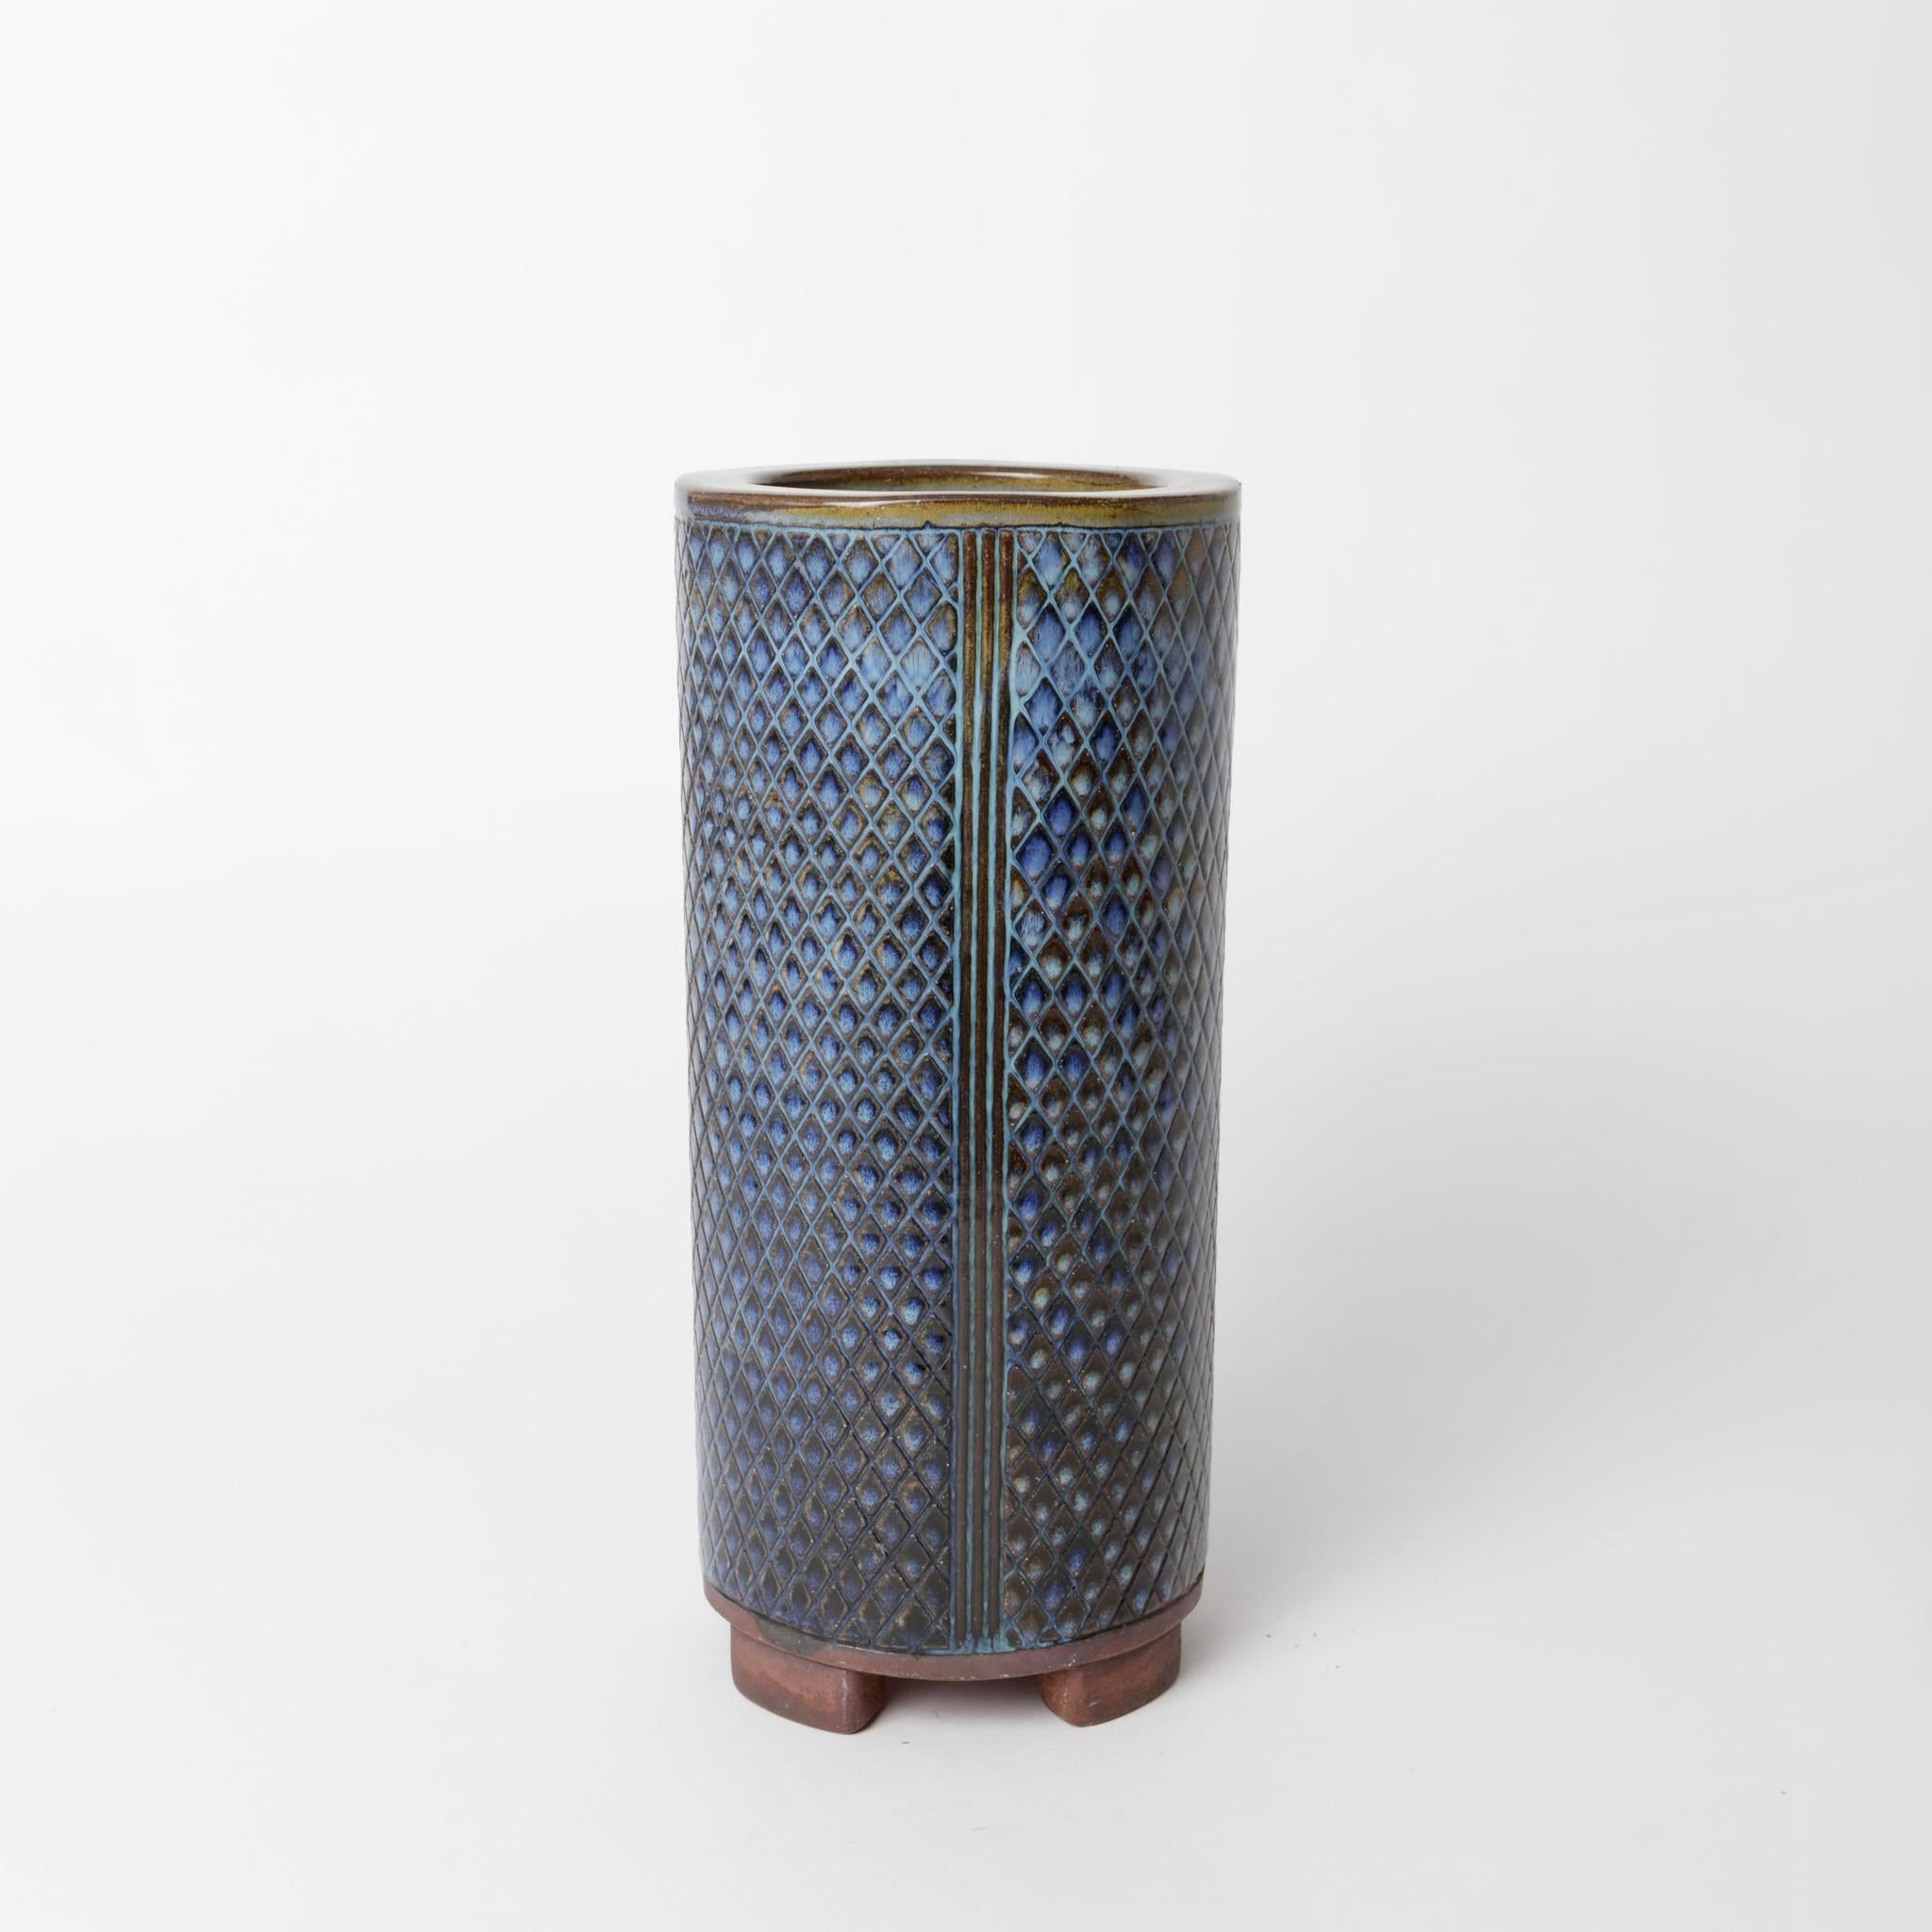 Farsta glazed stoneware vase by artist Wilhem Kage for Gustavsberg in Sweden. Signed by the artist.
Wilhelm Kage’s Farsta set comprises his most exclusive pottery artwork. The fired Farsta pieces were dipped in a bath with metal oxides which were